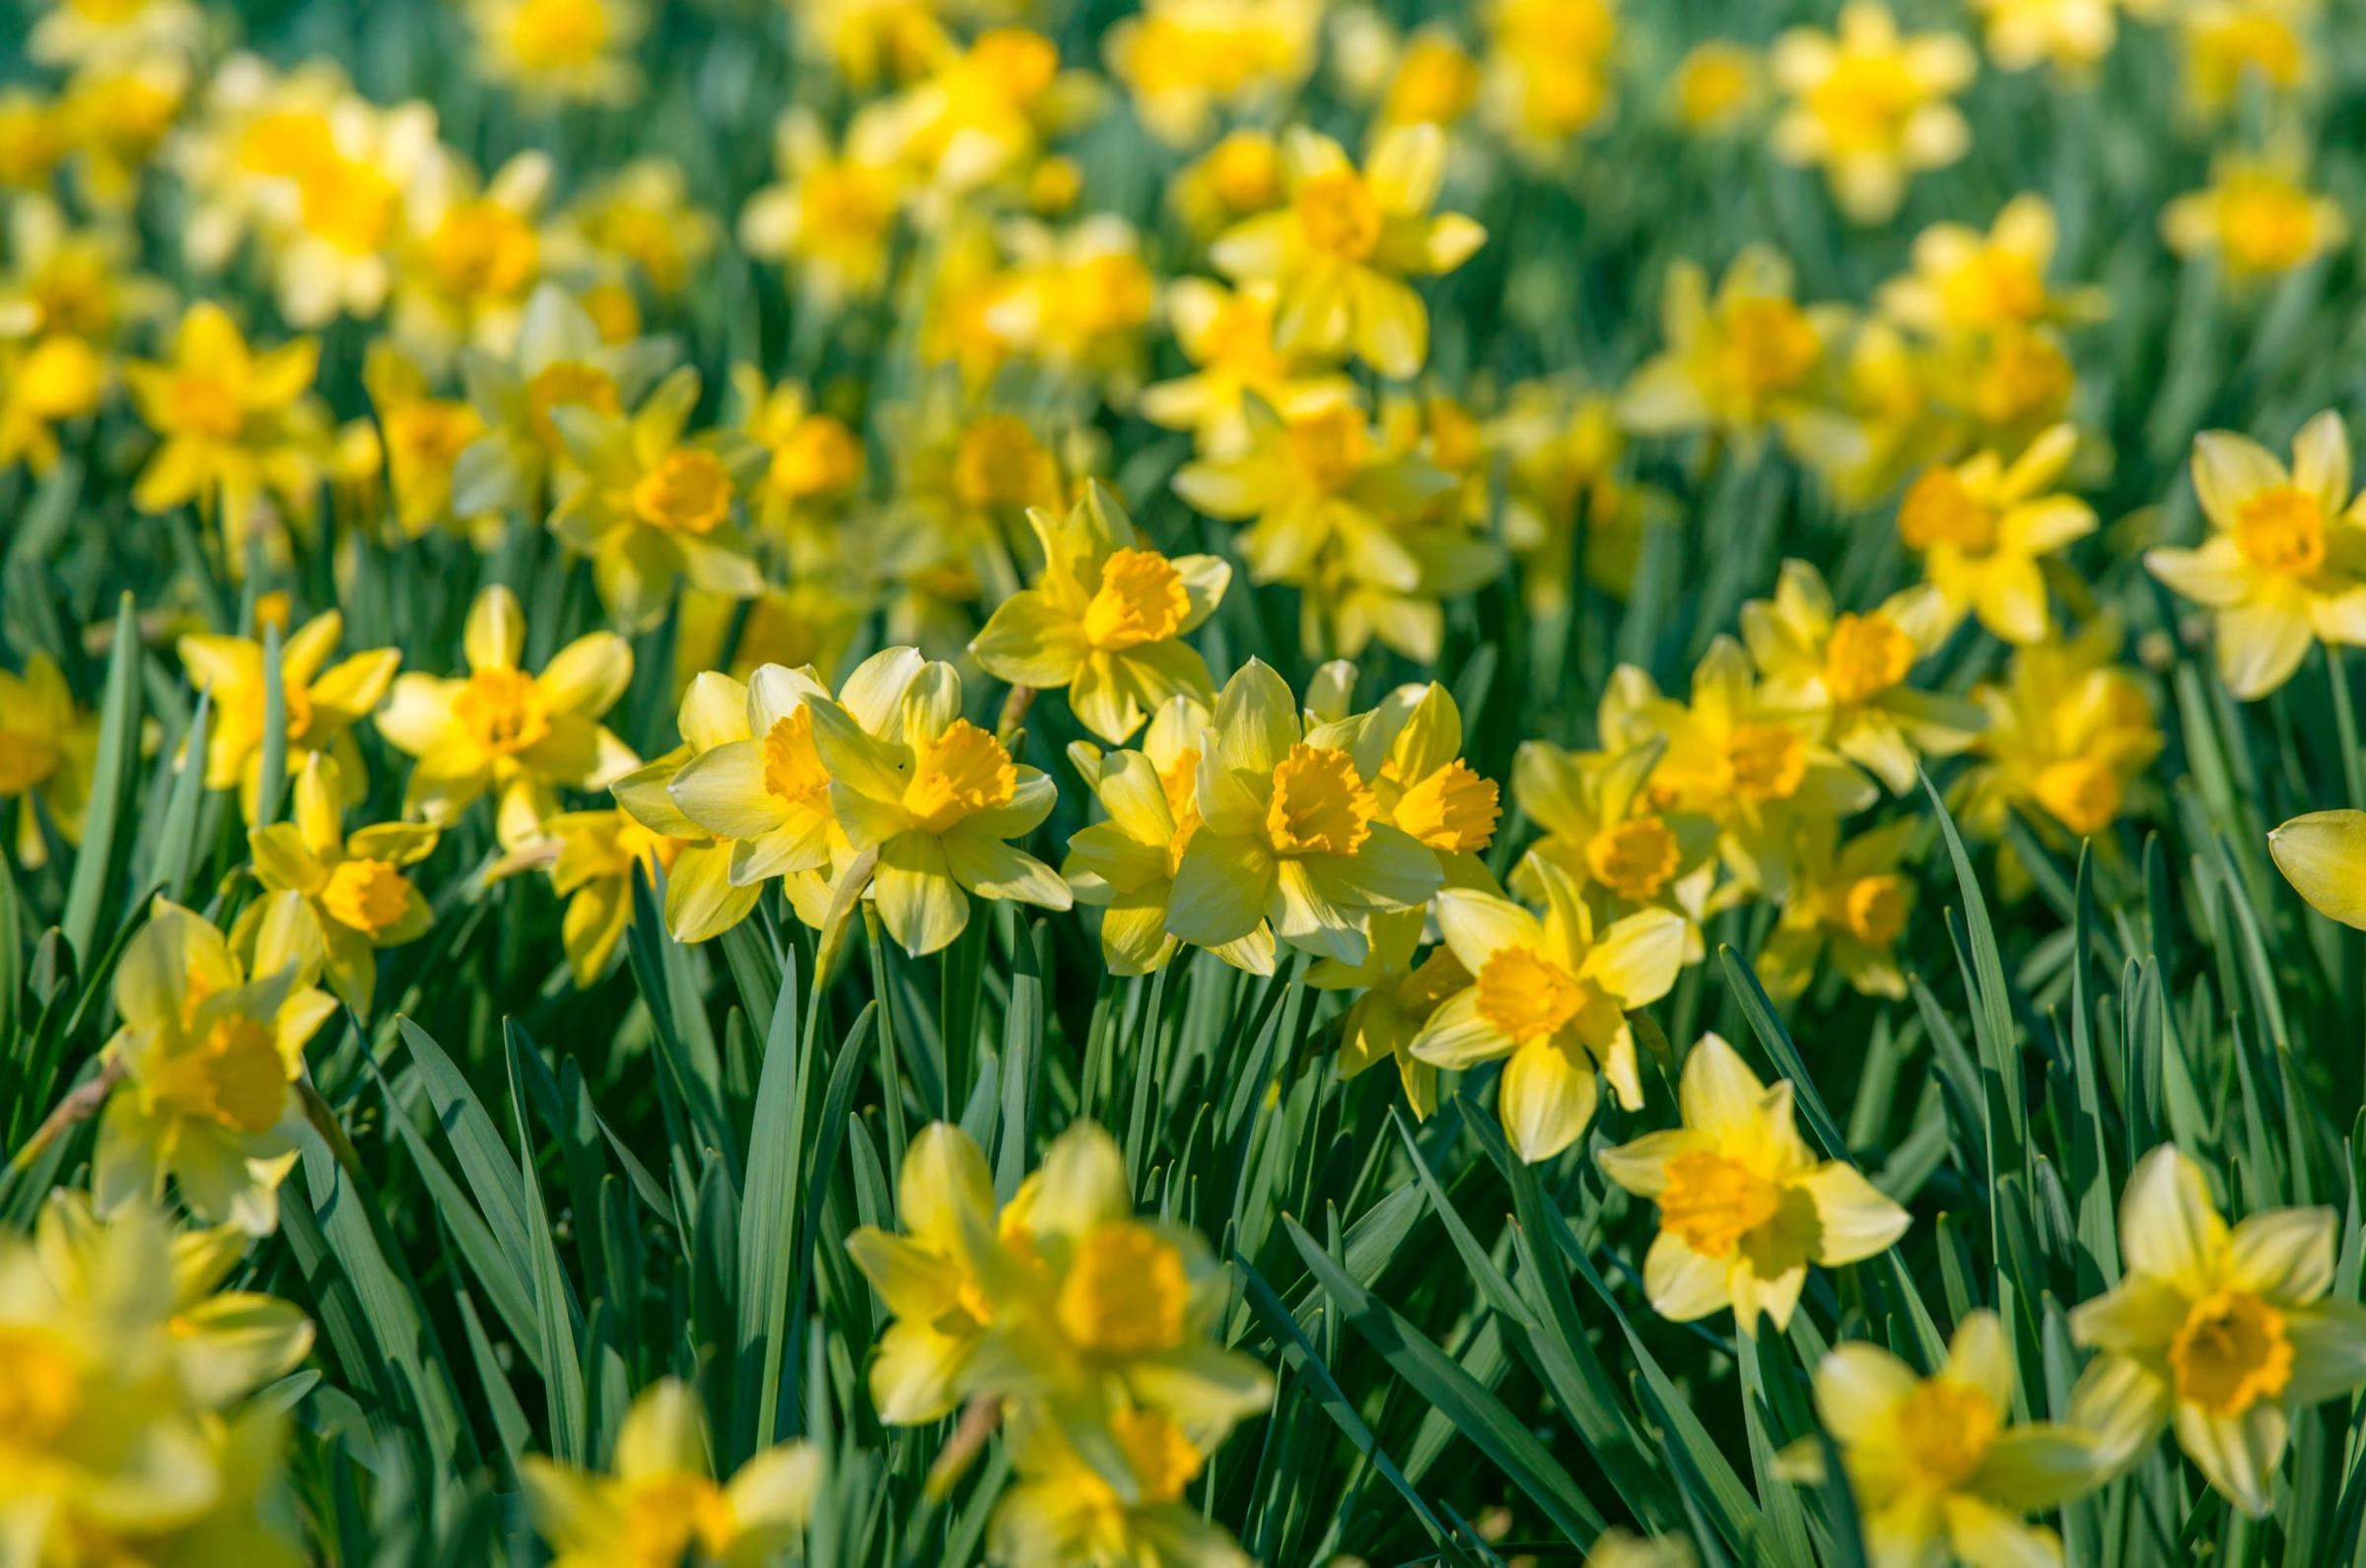 Varfell Farm is described as the largest and leading grower of daffodils in the world Picture from file: PA Images